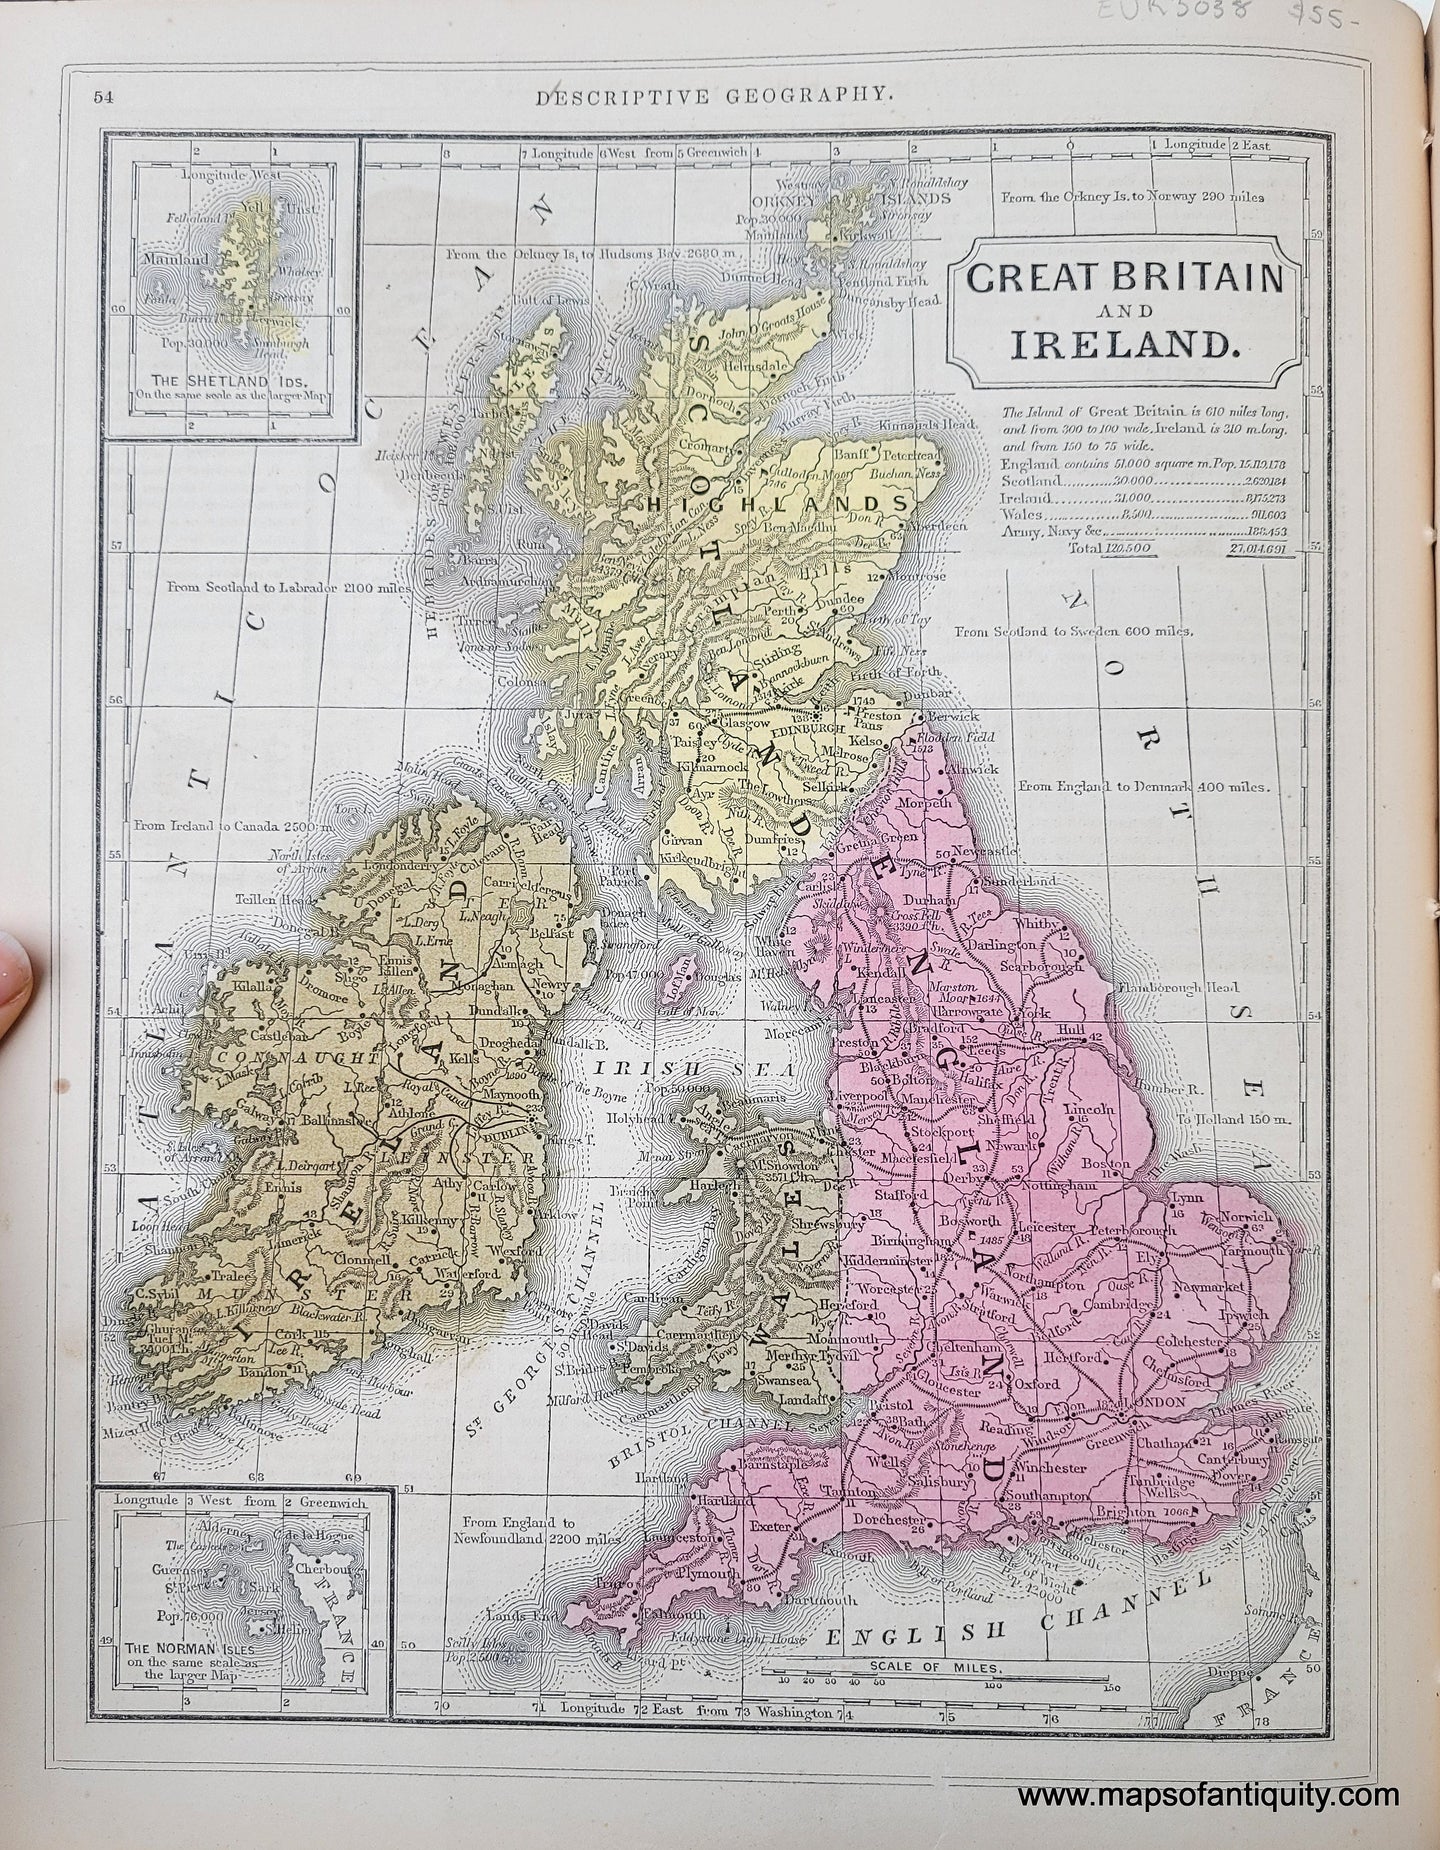 Genuine-Antique-Hand-Colored-Map-Great-Britain-and-Ireland-1850-Mitchell-Thomas-Cowperthwait-Co--Maps-Of-Antiquity